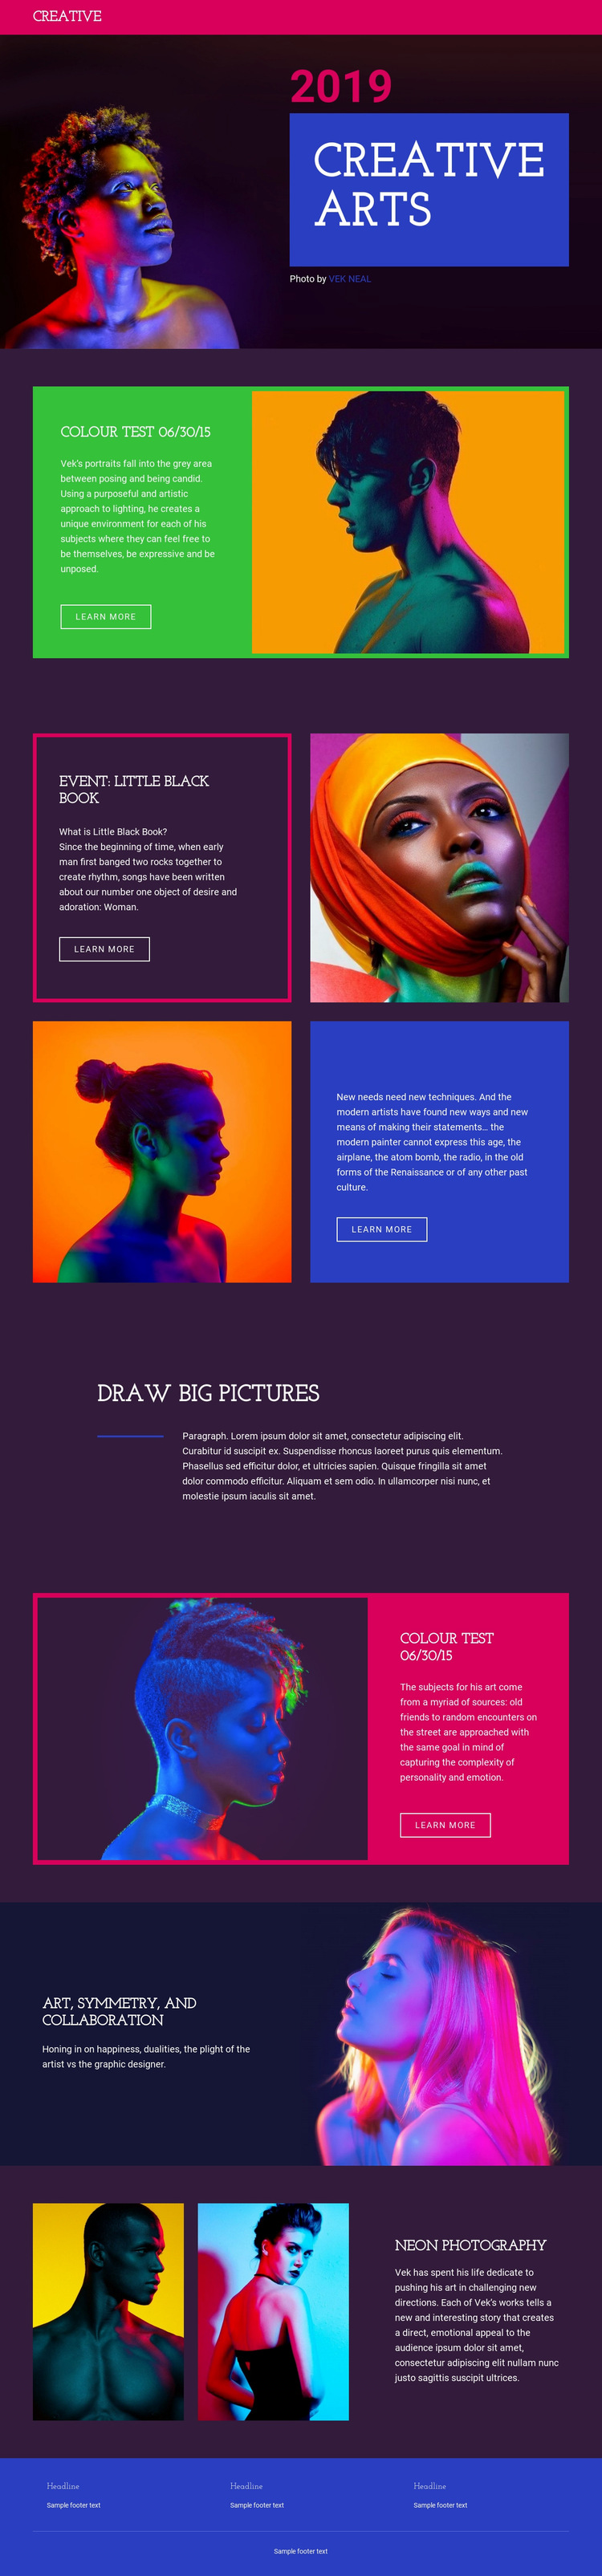 Limited-edition photography Website Builder Templates